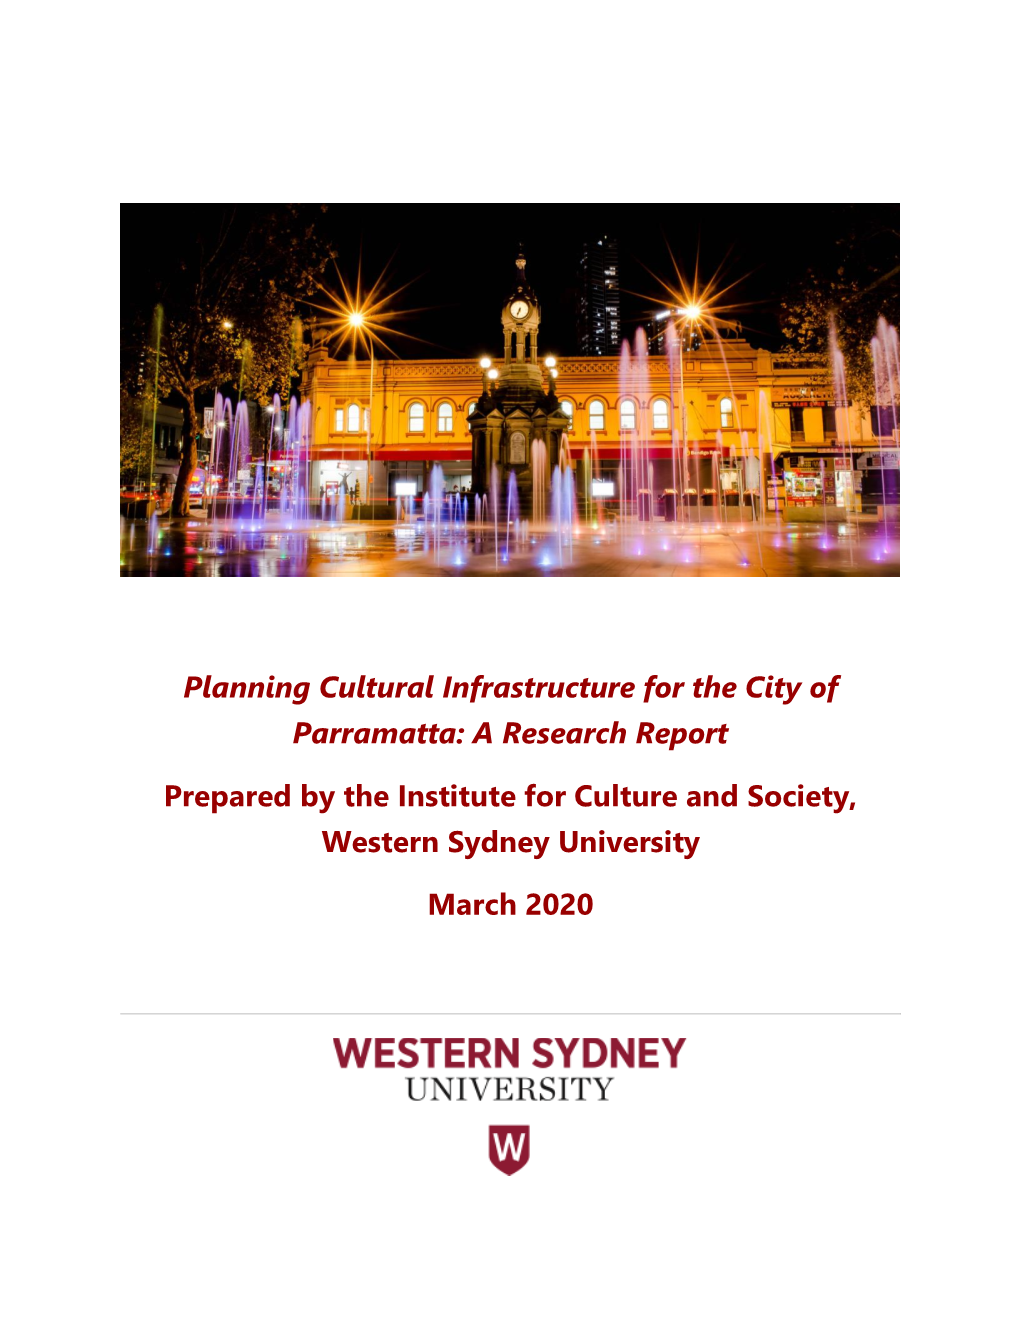 Planning Cultural Infrastructure for the City of Parramatta: a Research Report